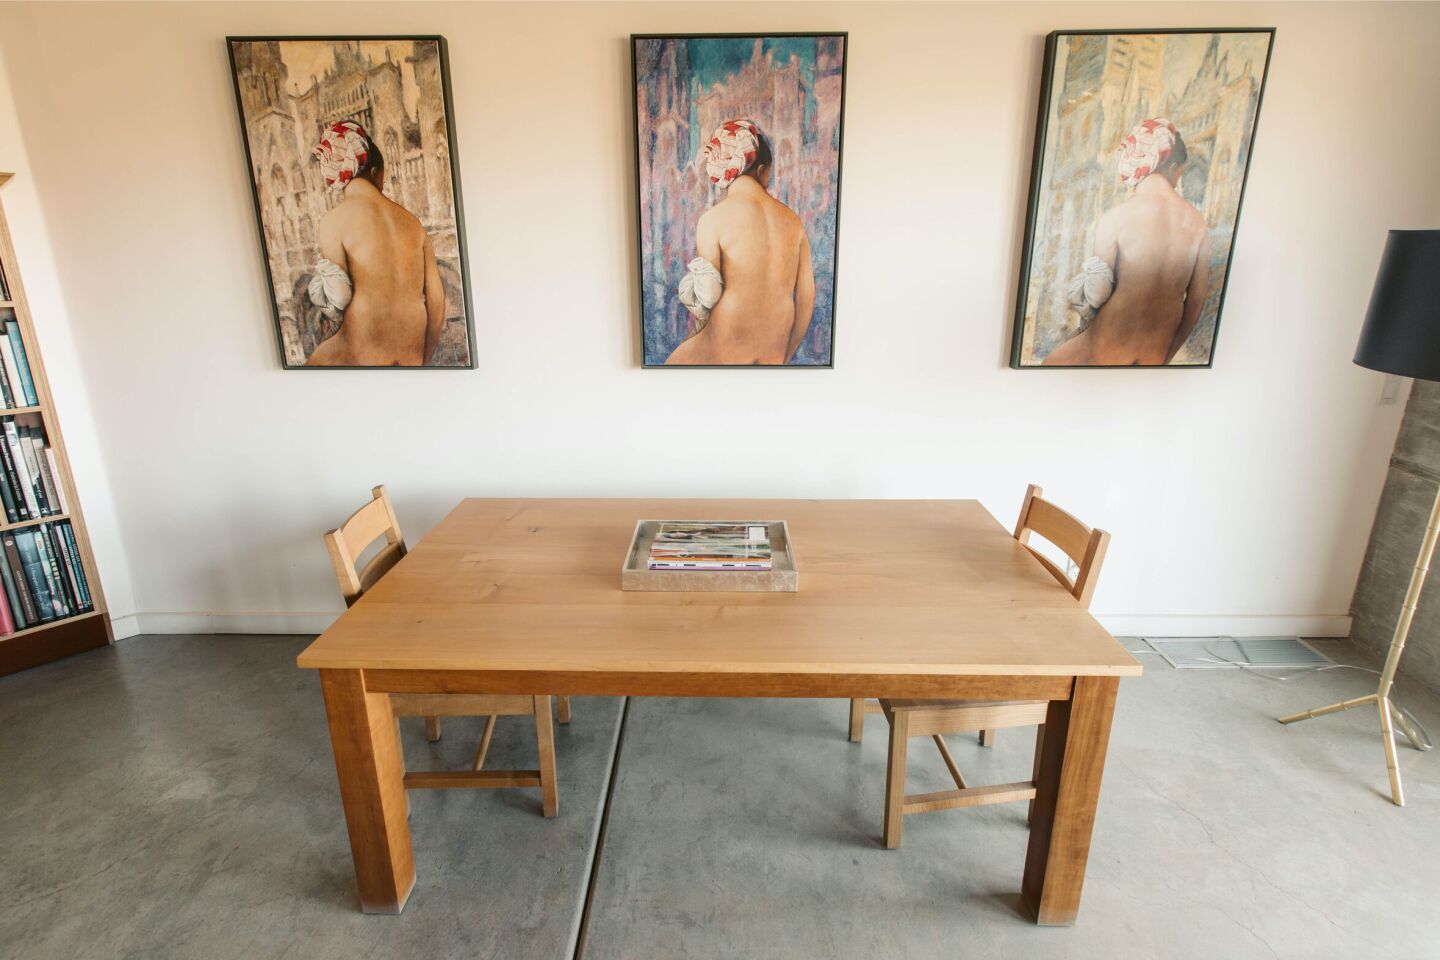 A table for two sits against a white wall with three works of art.